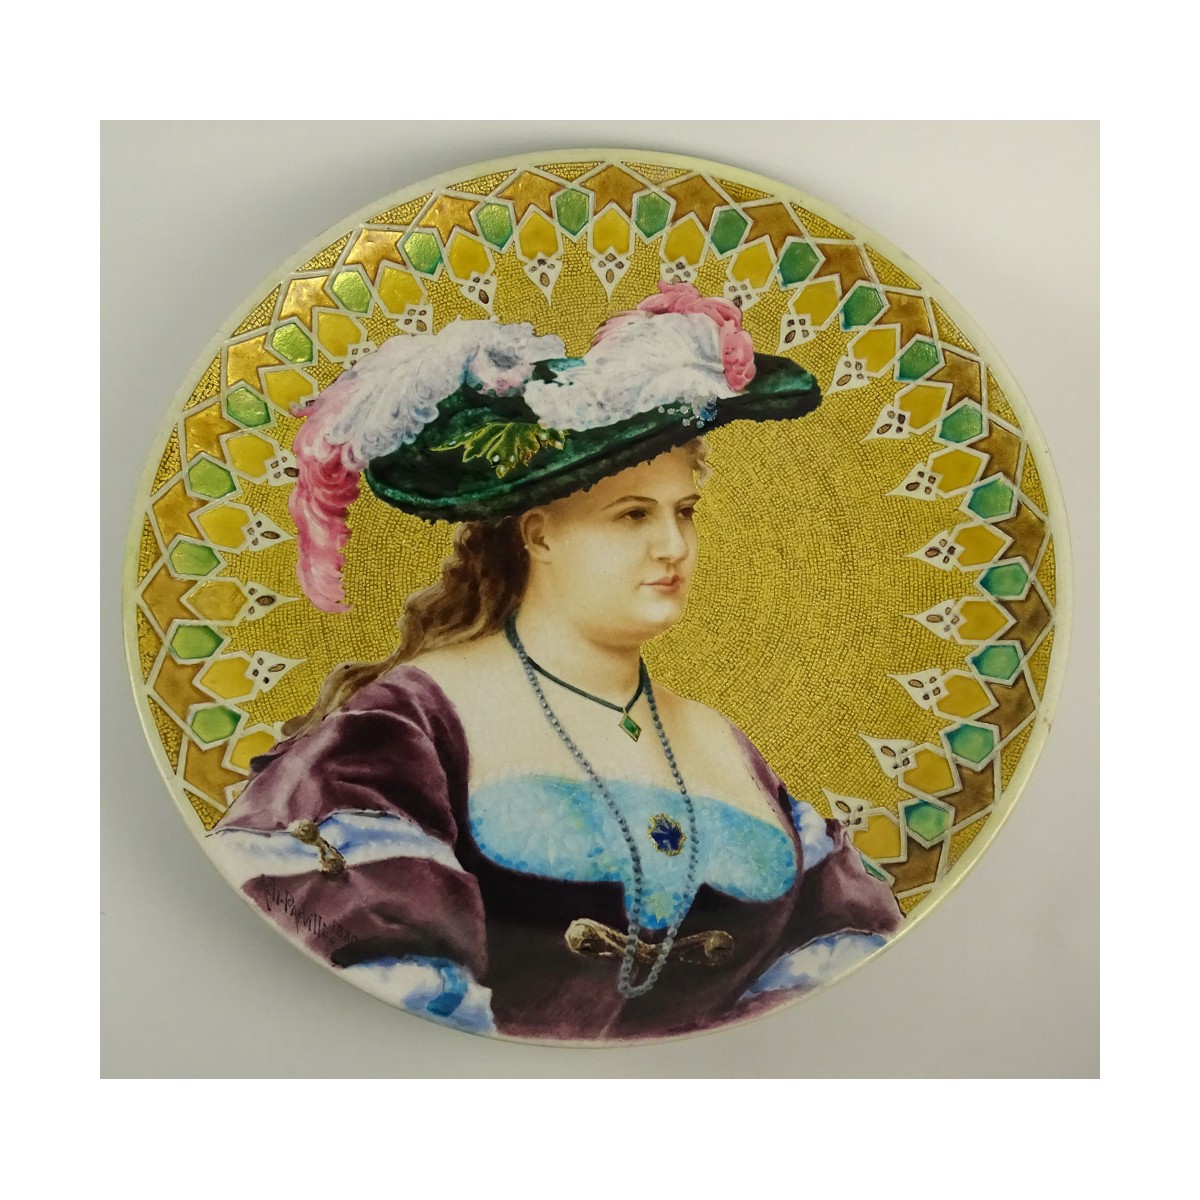 Parville Freres Large Ceramic Charger, enamel-decorated in the Moorish style with a portrait of a l